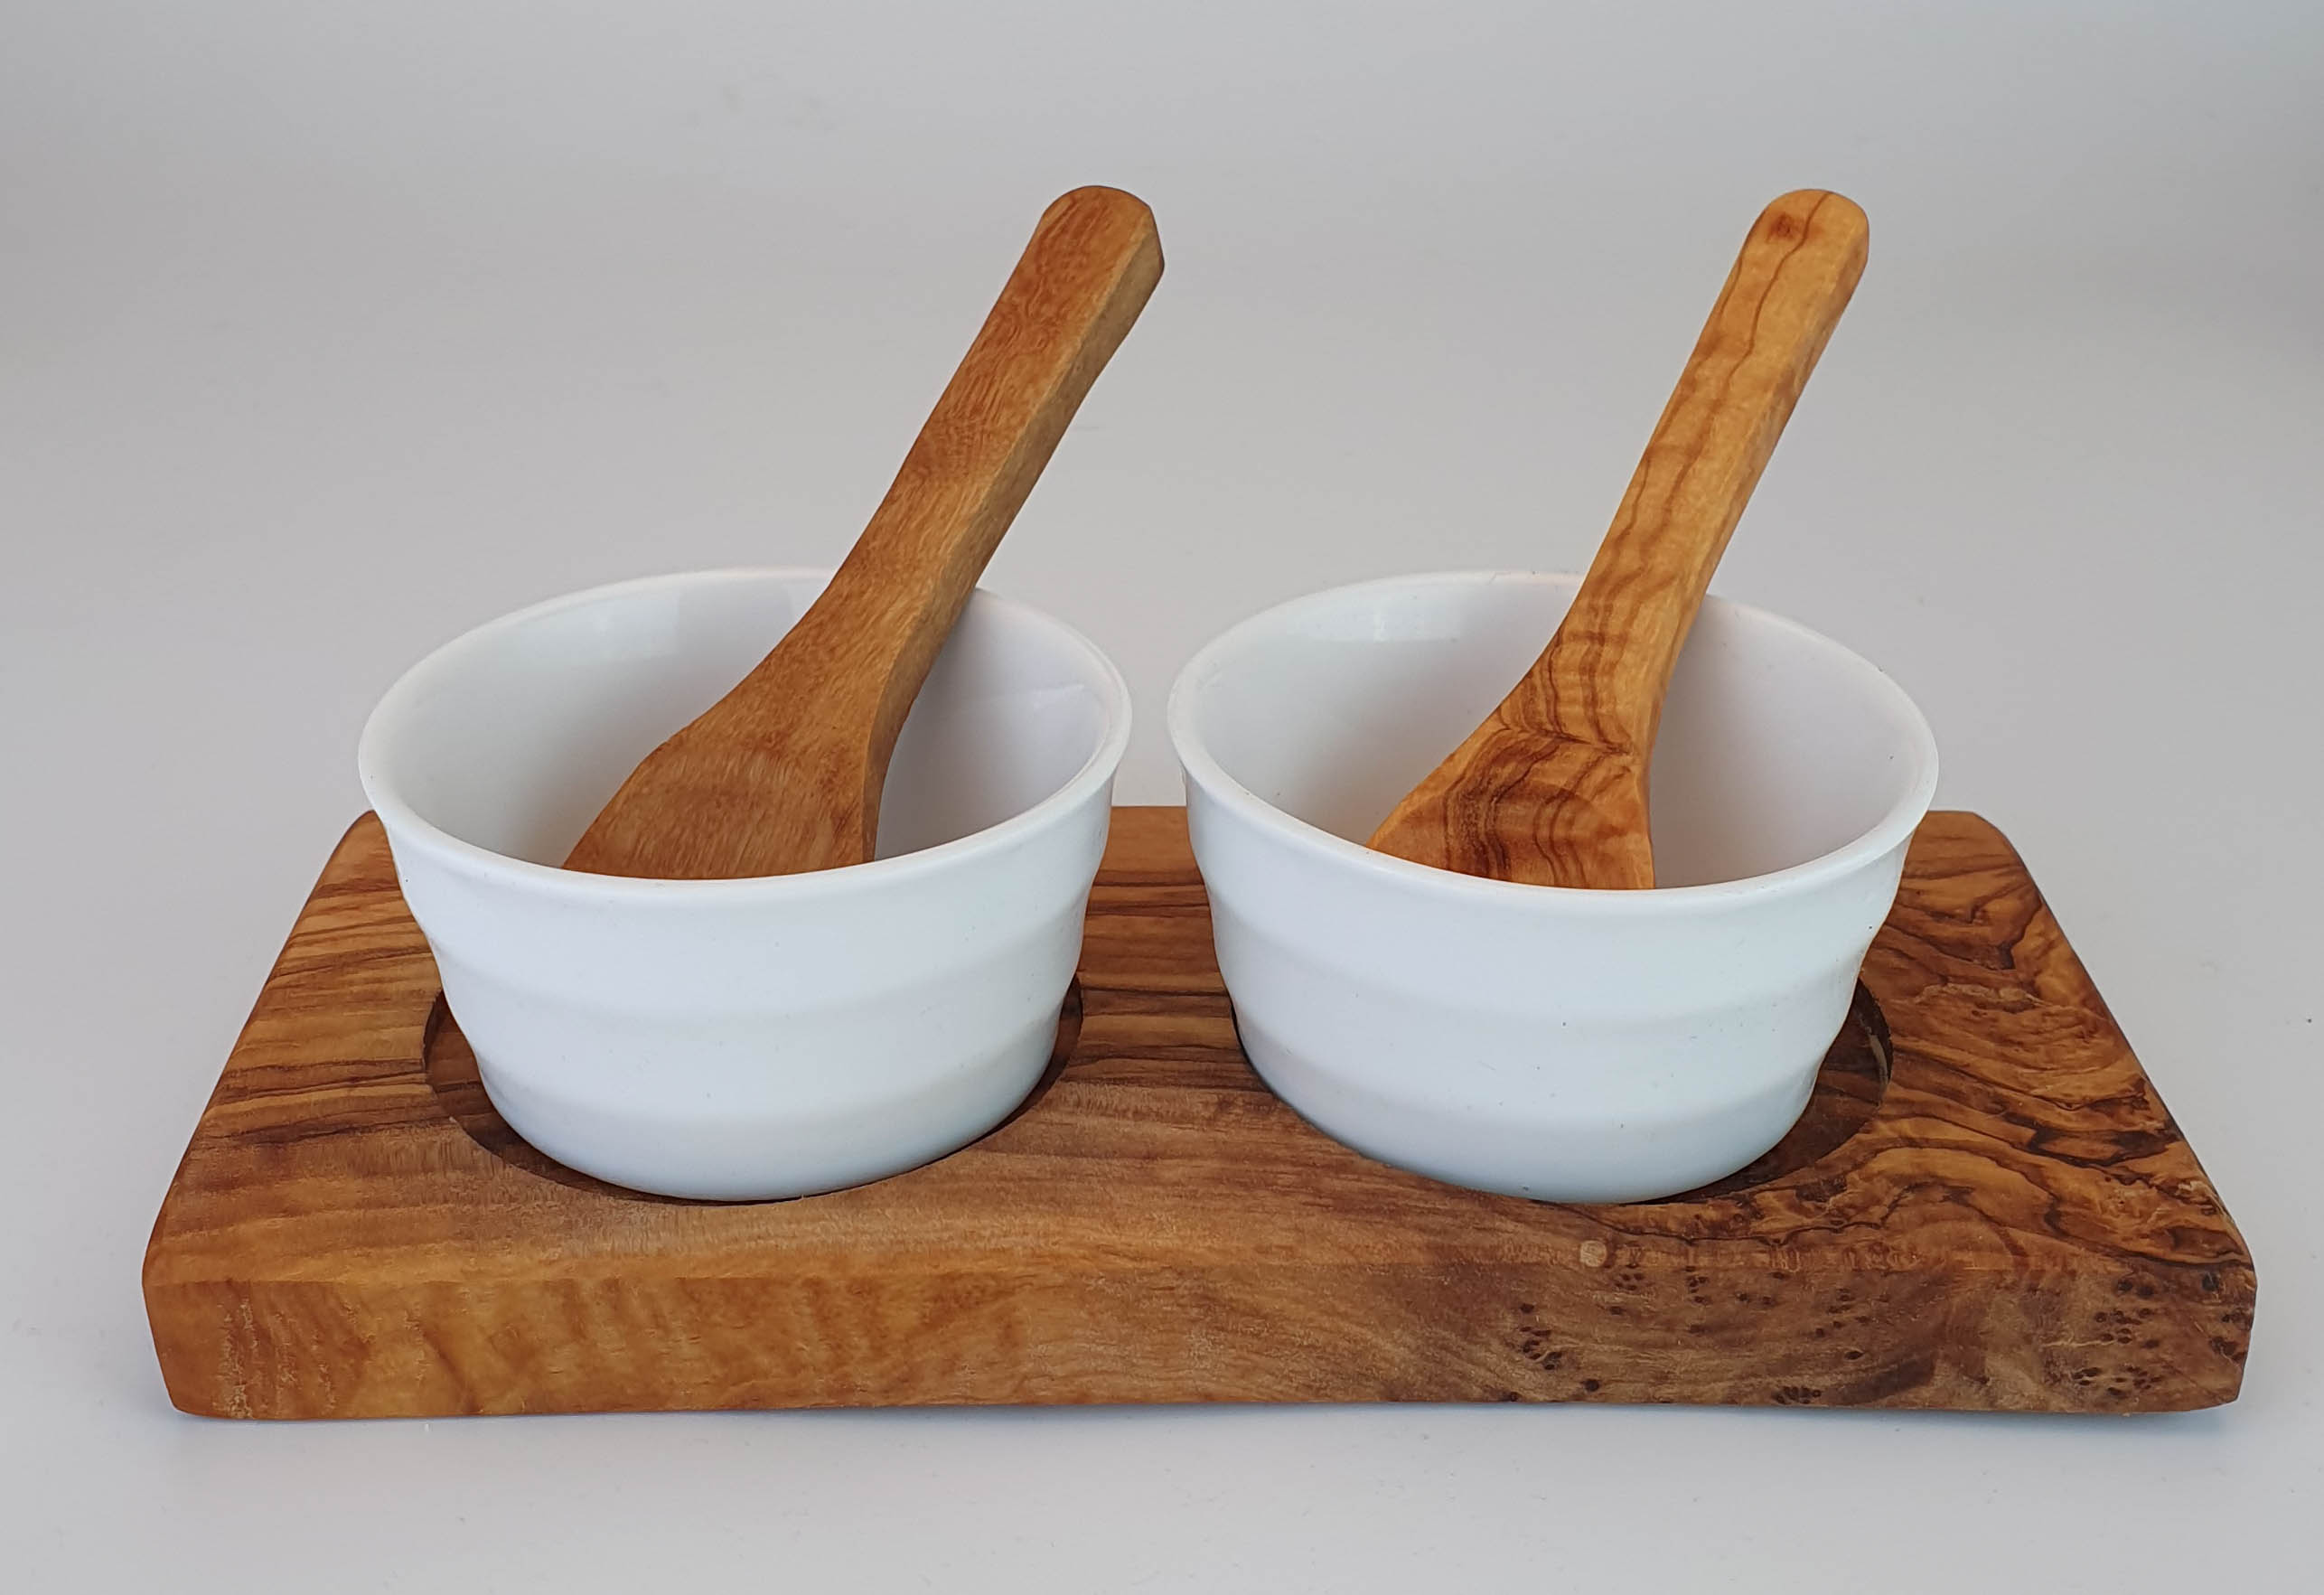 2-piece dip set 2022 with olive wood and small porcelain bowls.